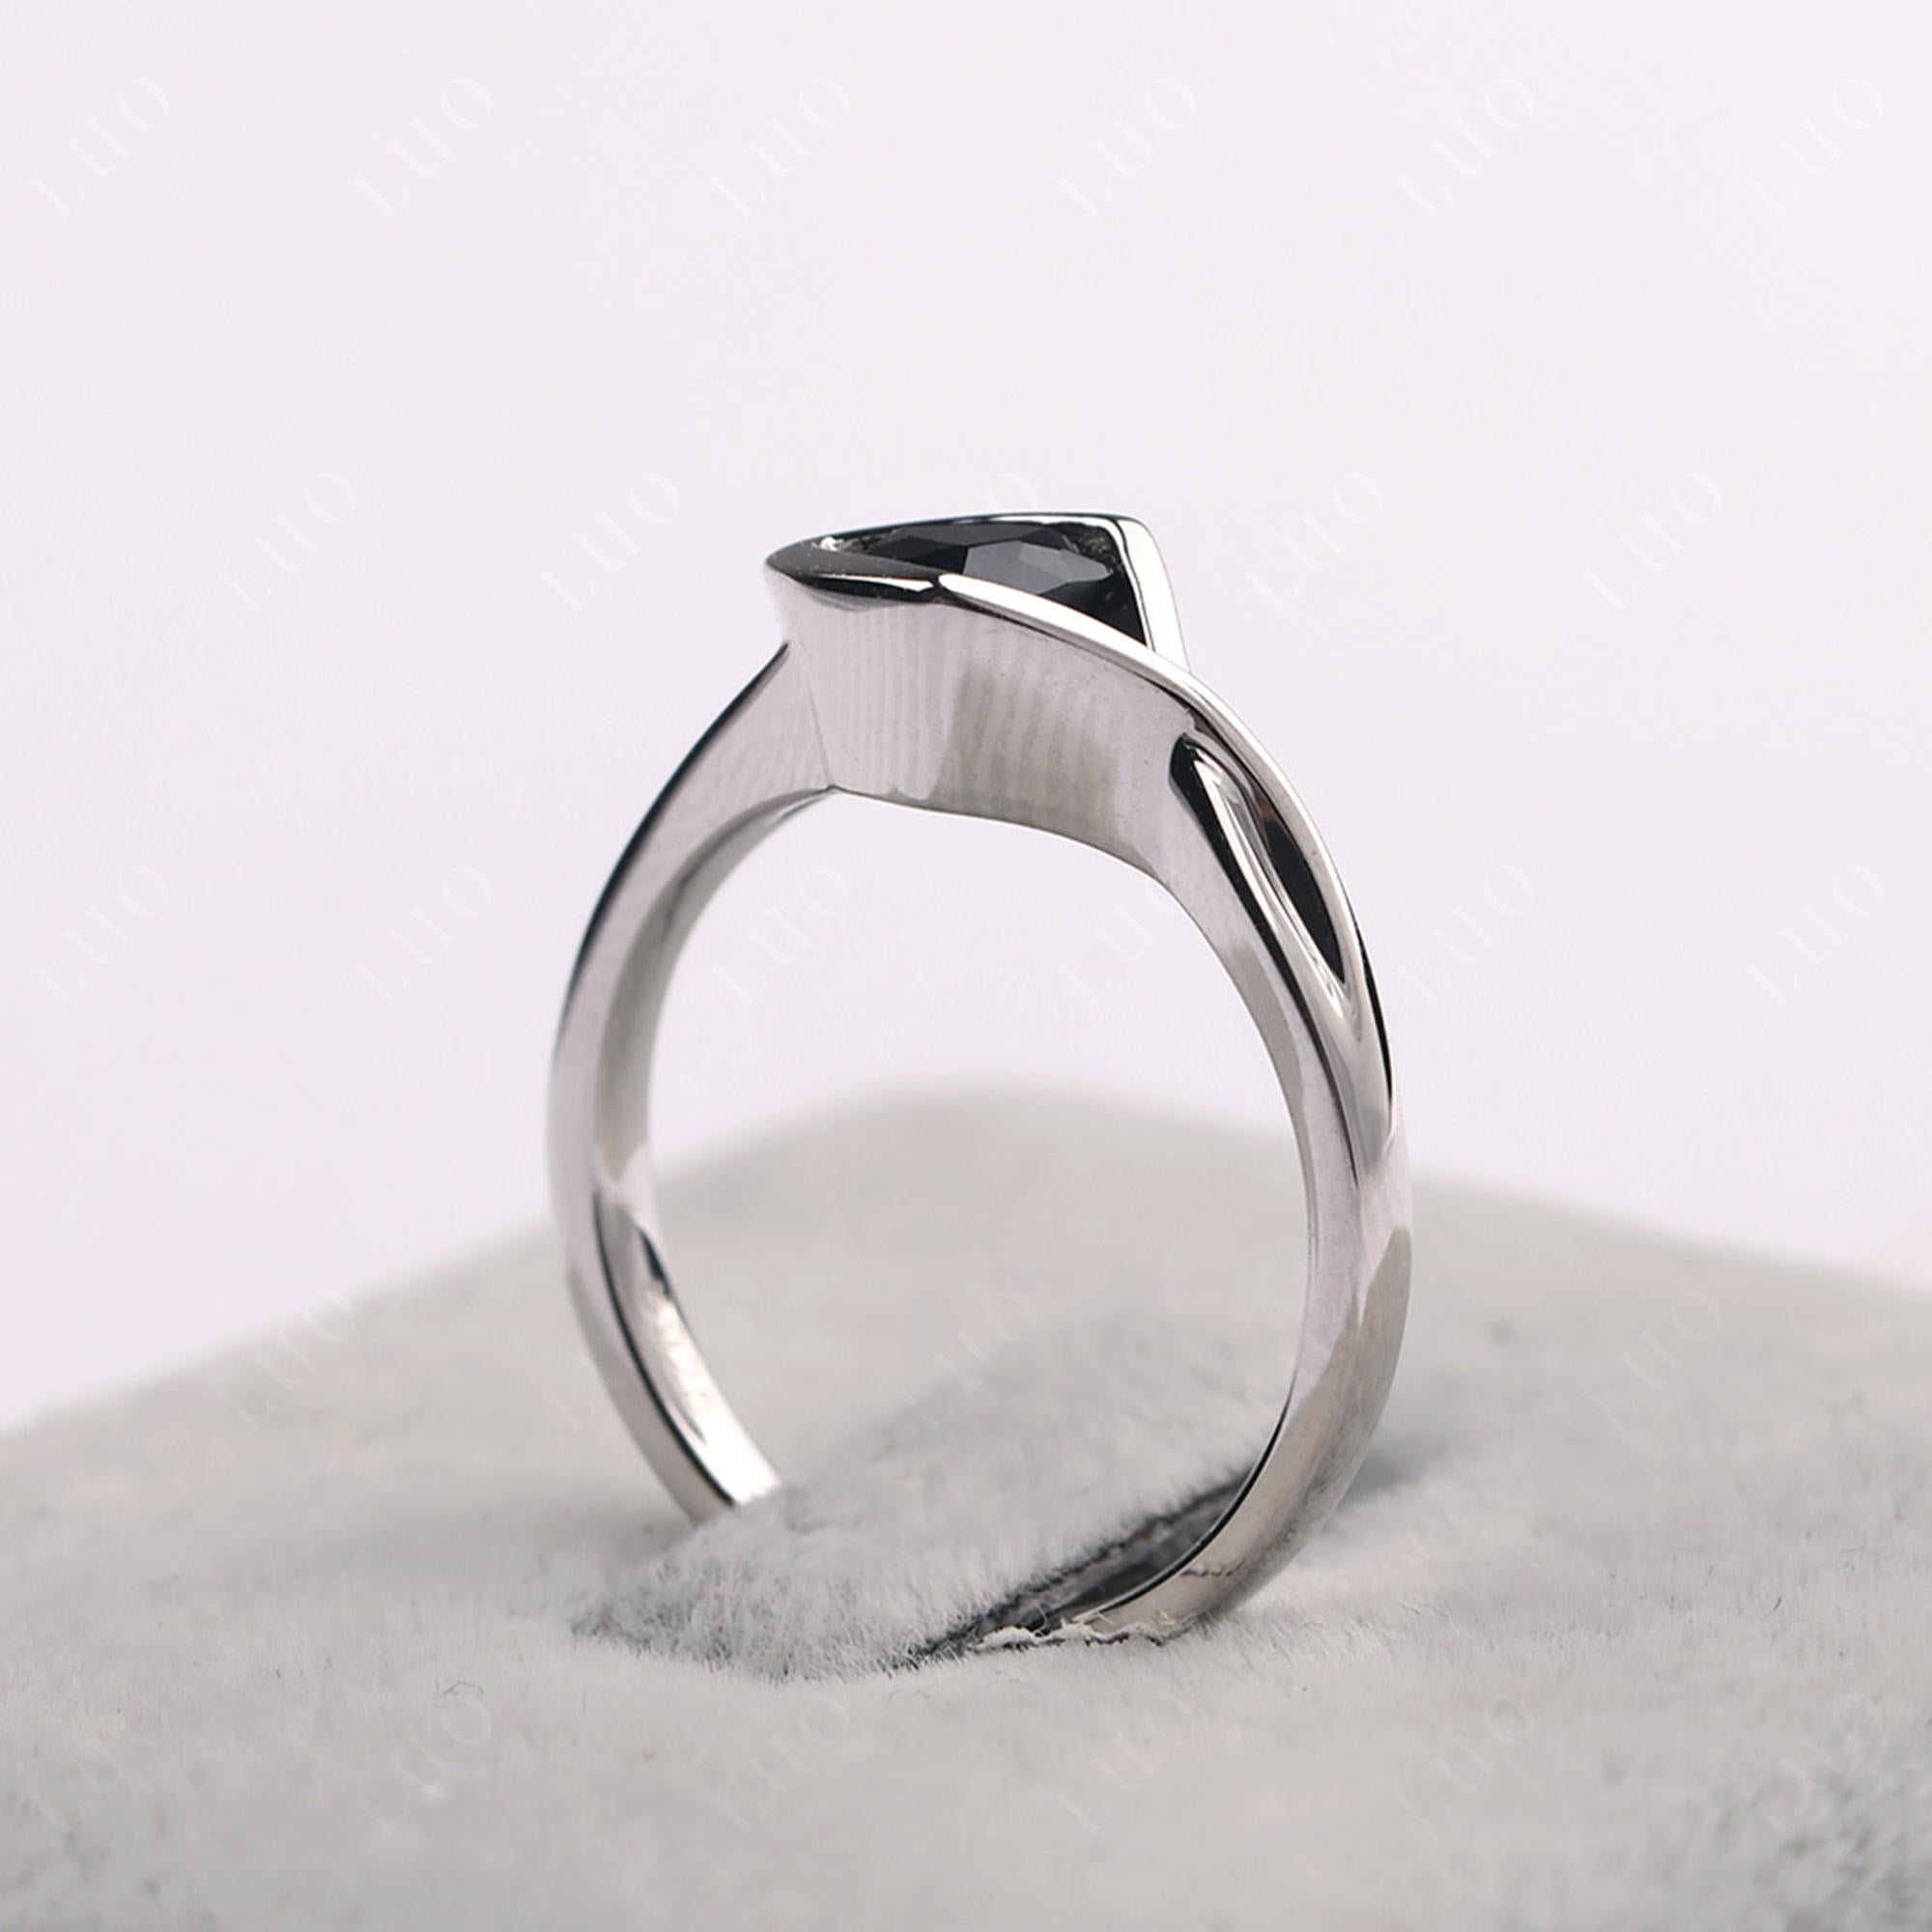 Trillion Cut Simple Black Stone Ring - LUO Jewelry